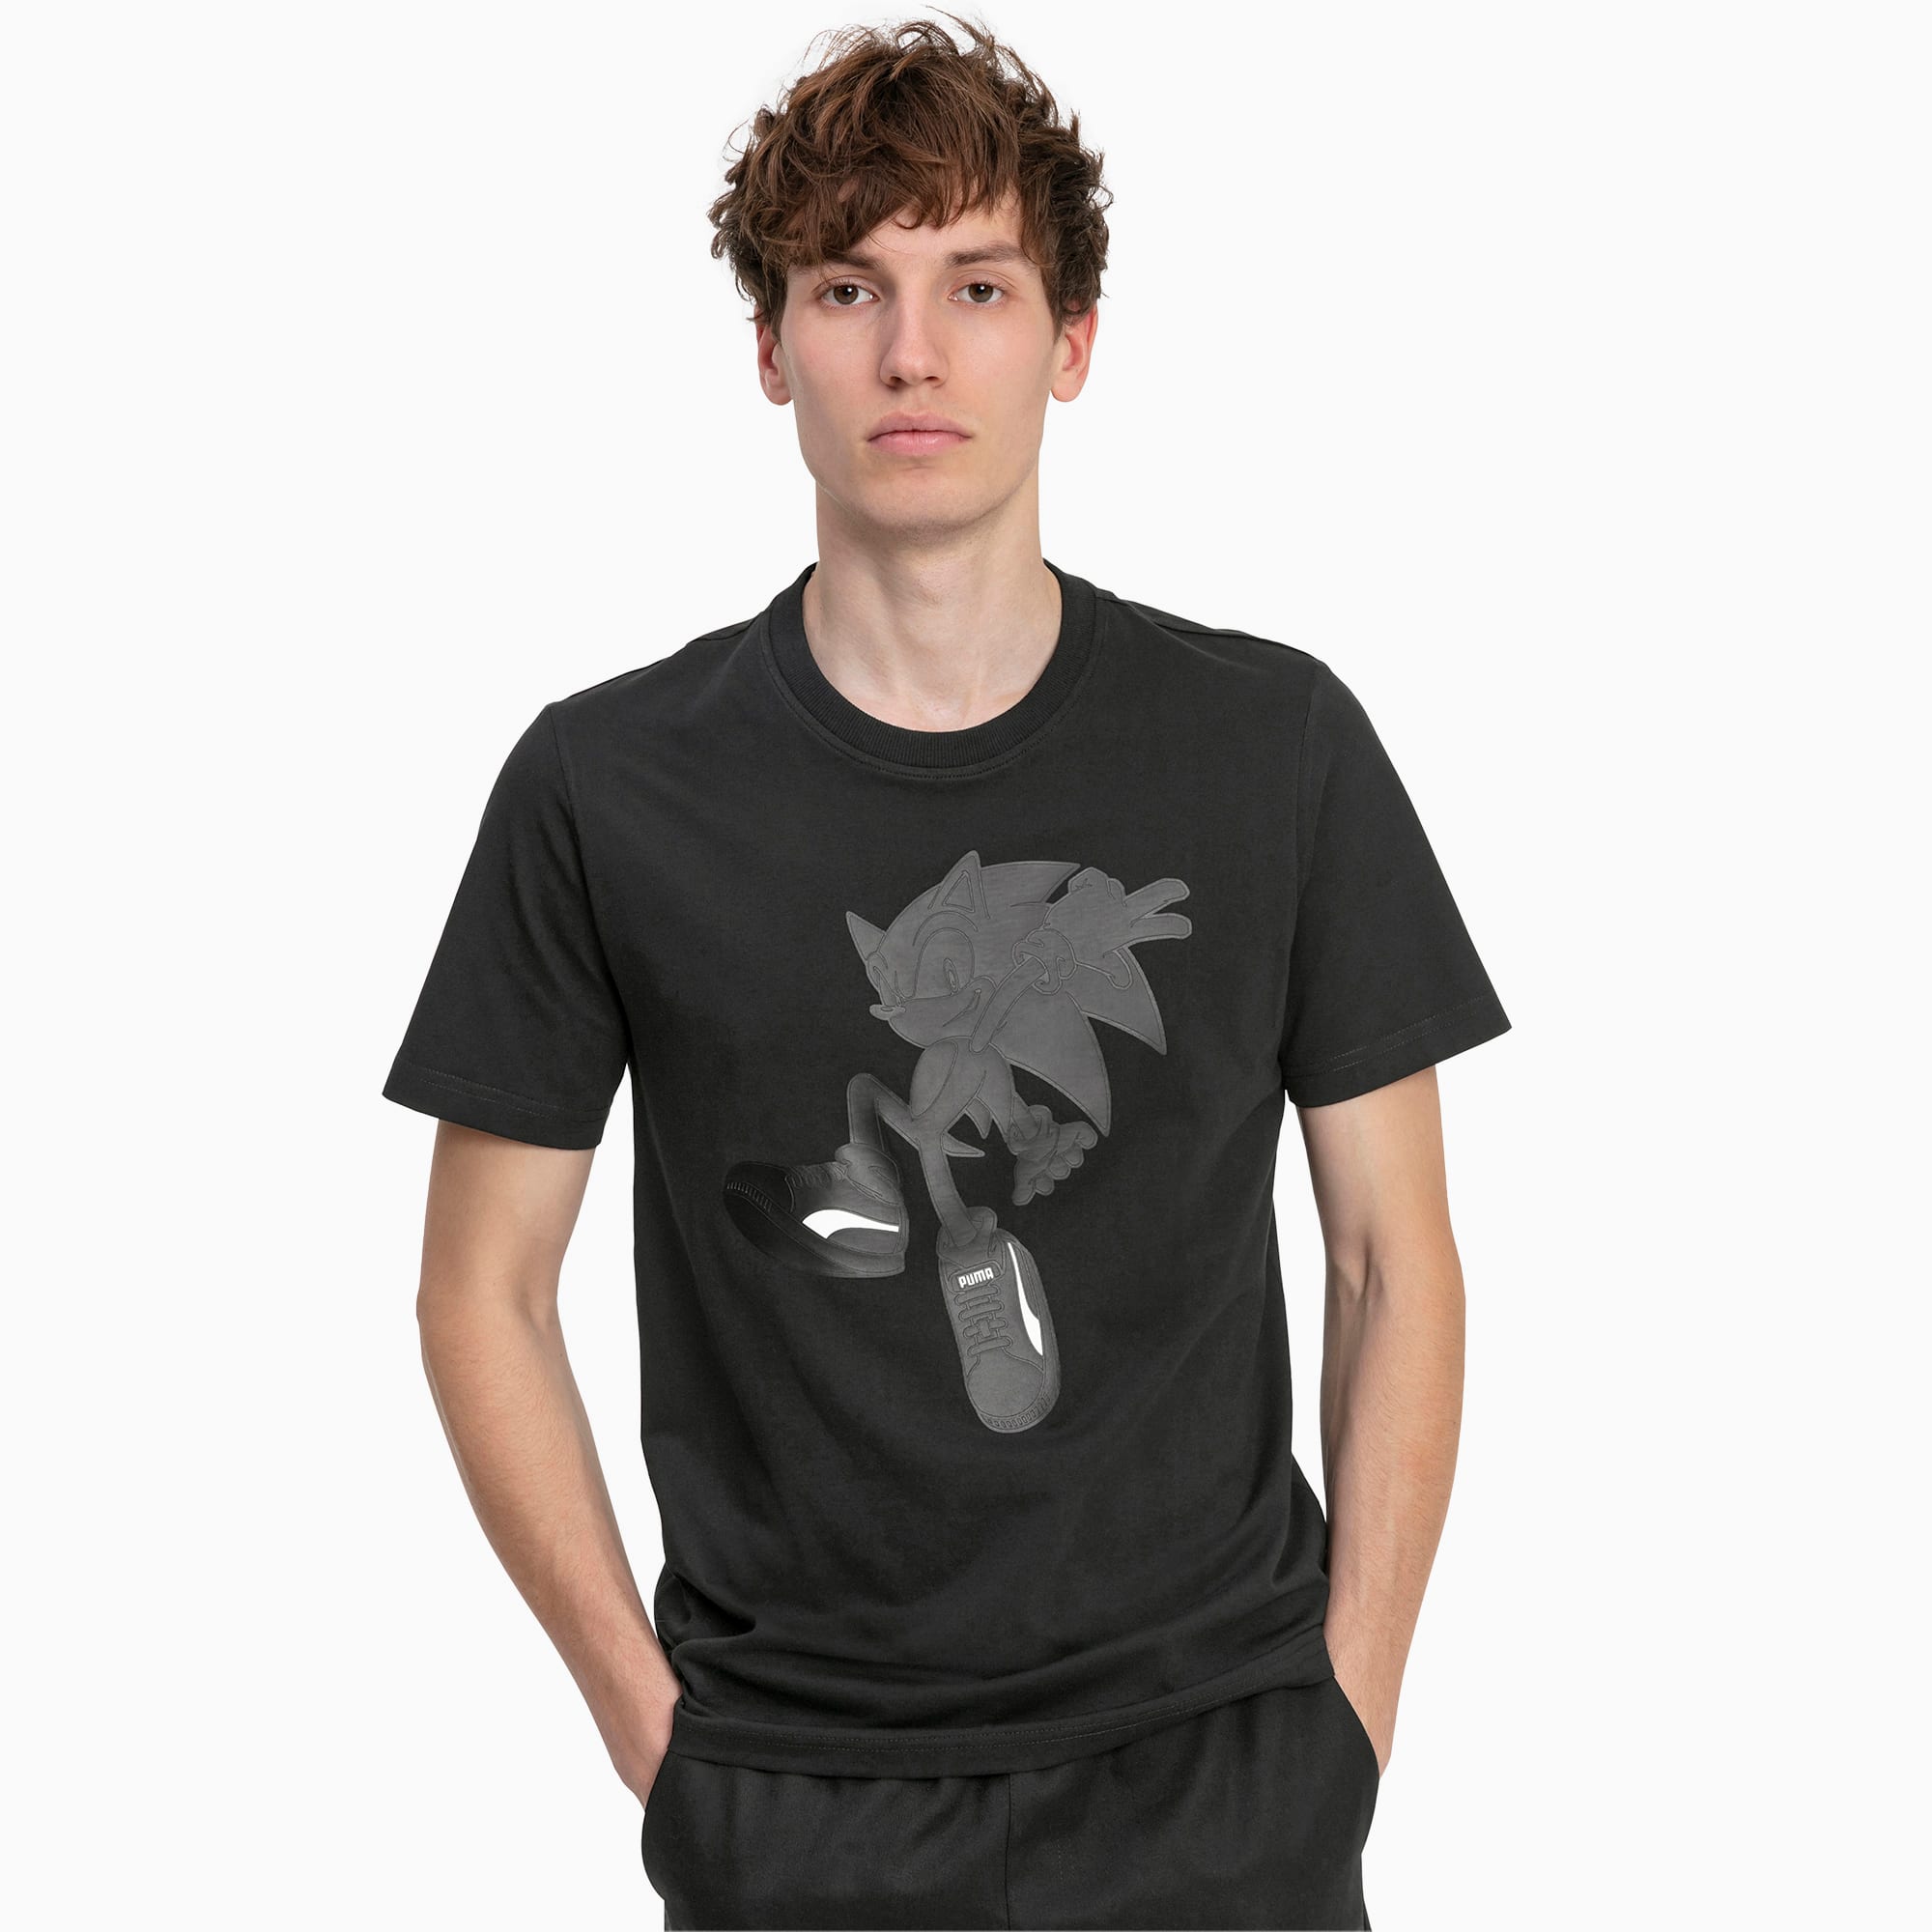 puma forever faster t shirt